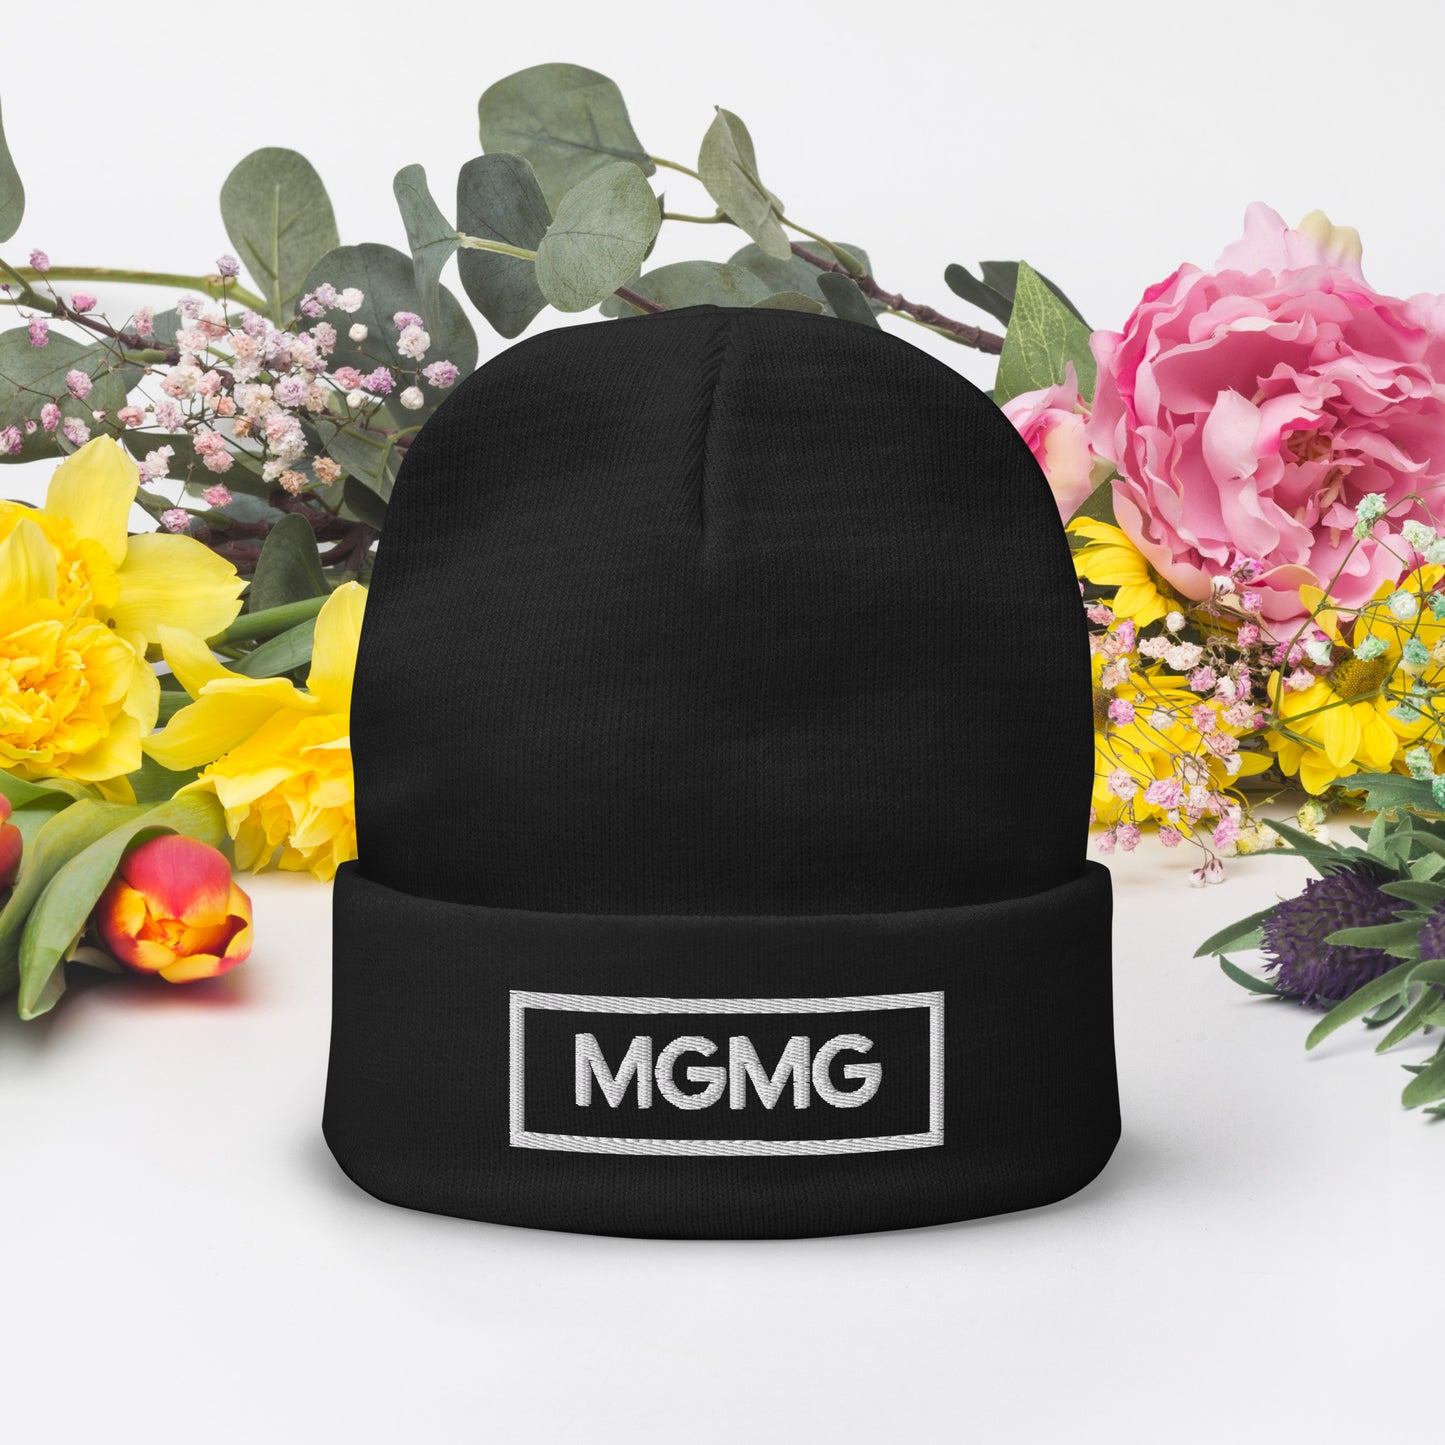 Embroidered (MGMG) Beanie